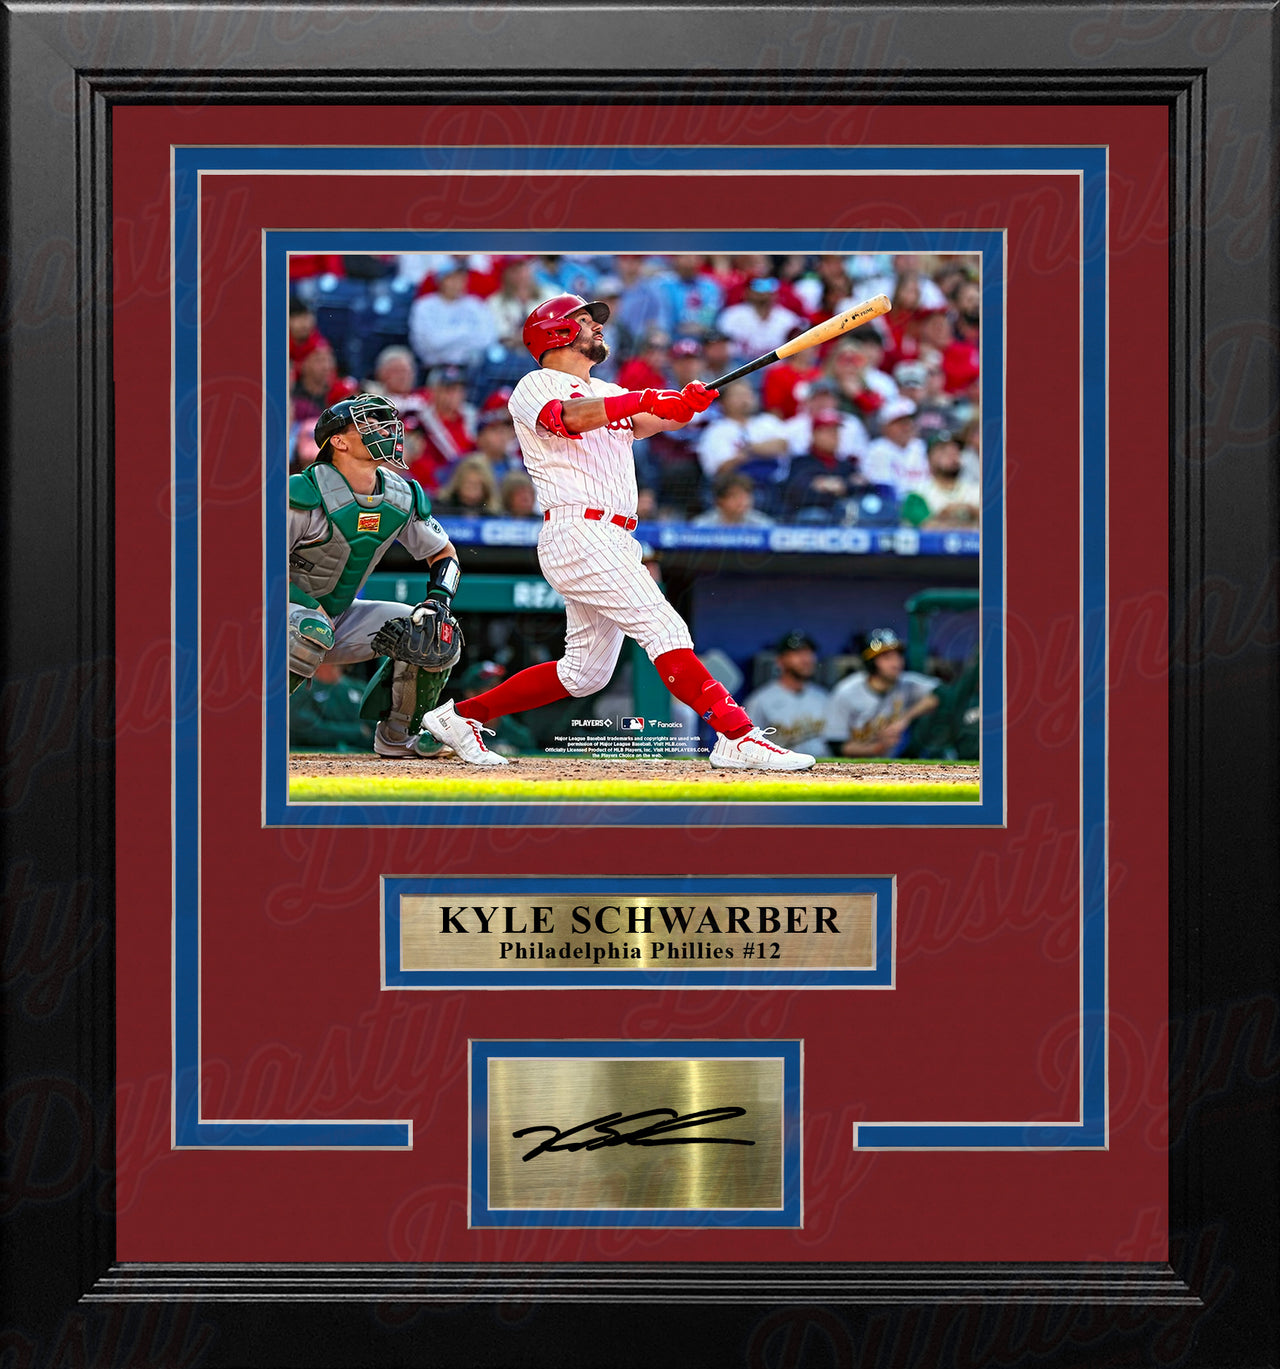 Kyle Schwarber Home Run Swing Philadelphia Phillies 8" x 10" Framed Photo with Engraved Autograph